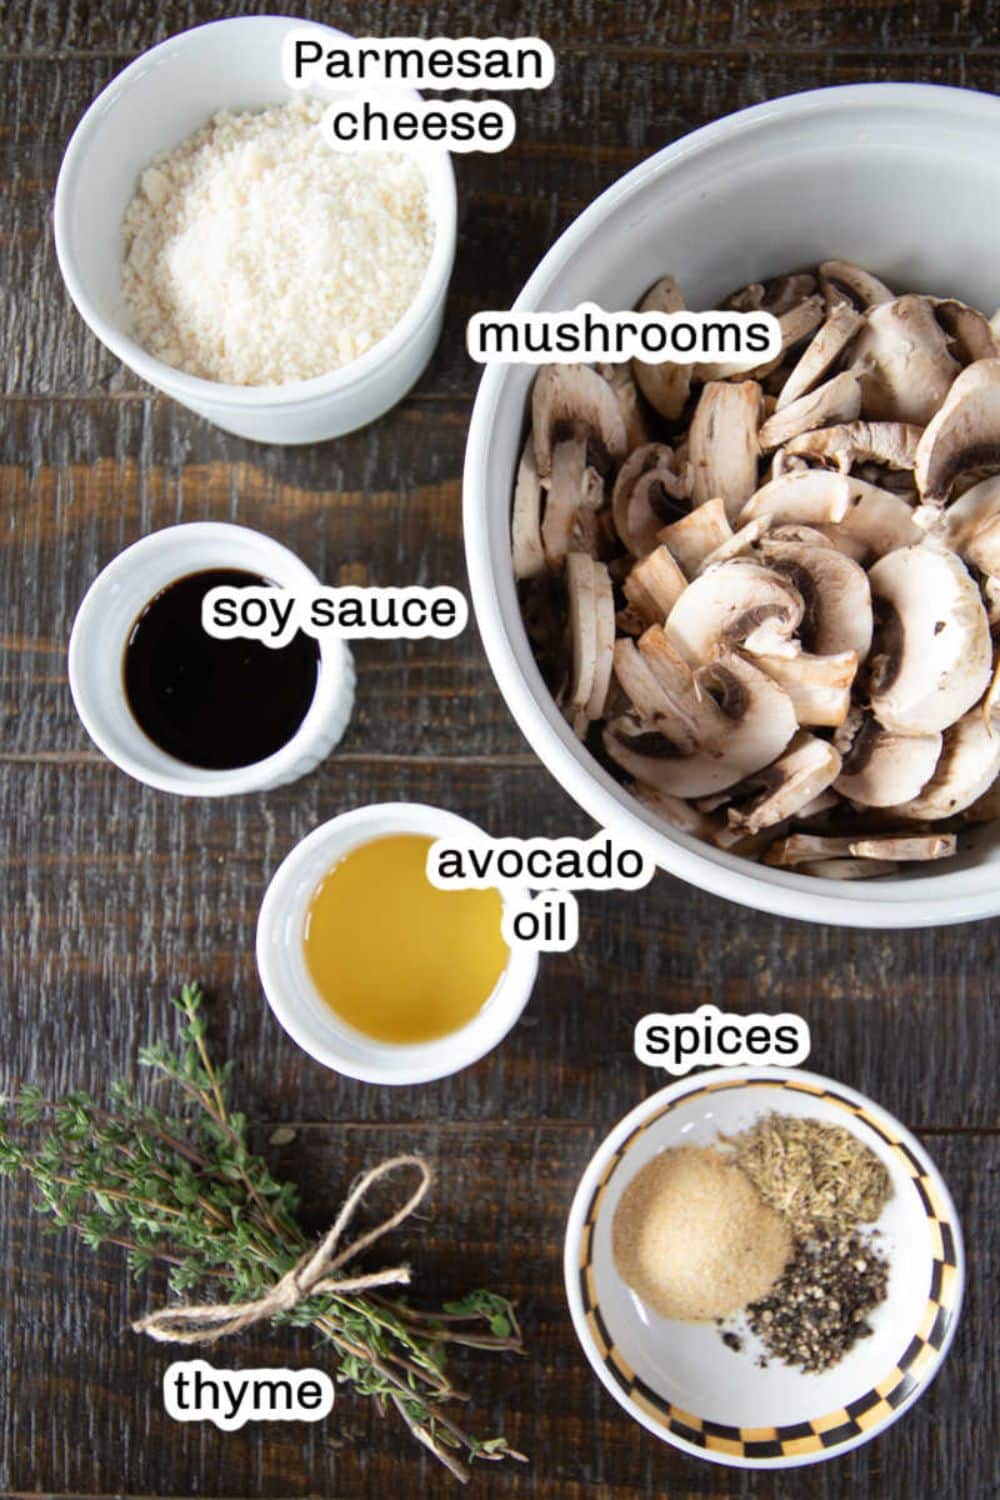 Ingredients for air fried garlic mushrooms include mushrooms, cheese, soy sauce, avocado oil, thyme and spices.